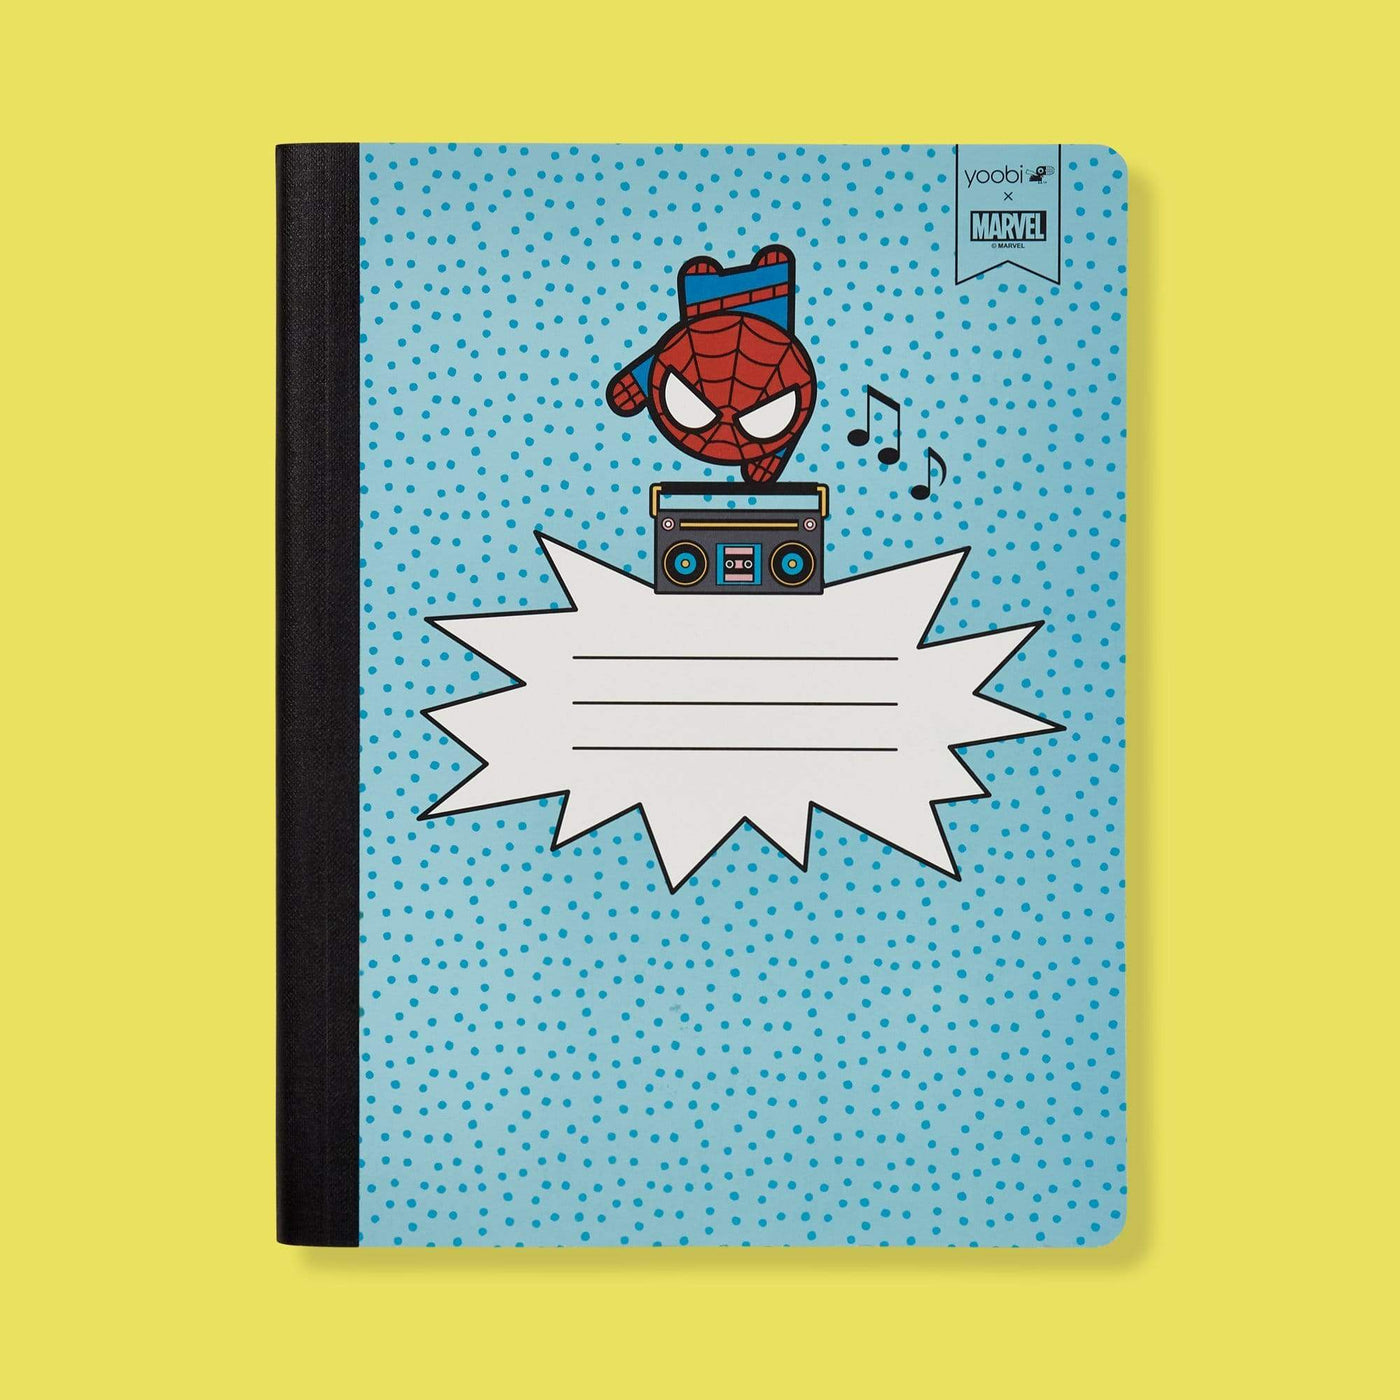 Yoobi x Marvel Spider-Man Spiral Notebook - 1 Subject College Ruled  Notebook, 3-Hole Punched, 100 Sheets - For School & Office - PVC Free, FSC